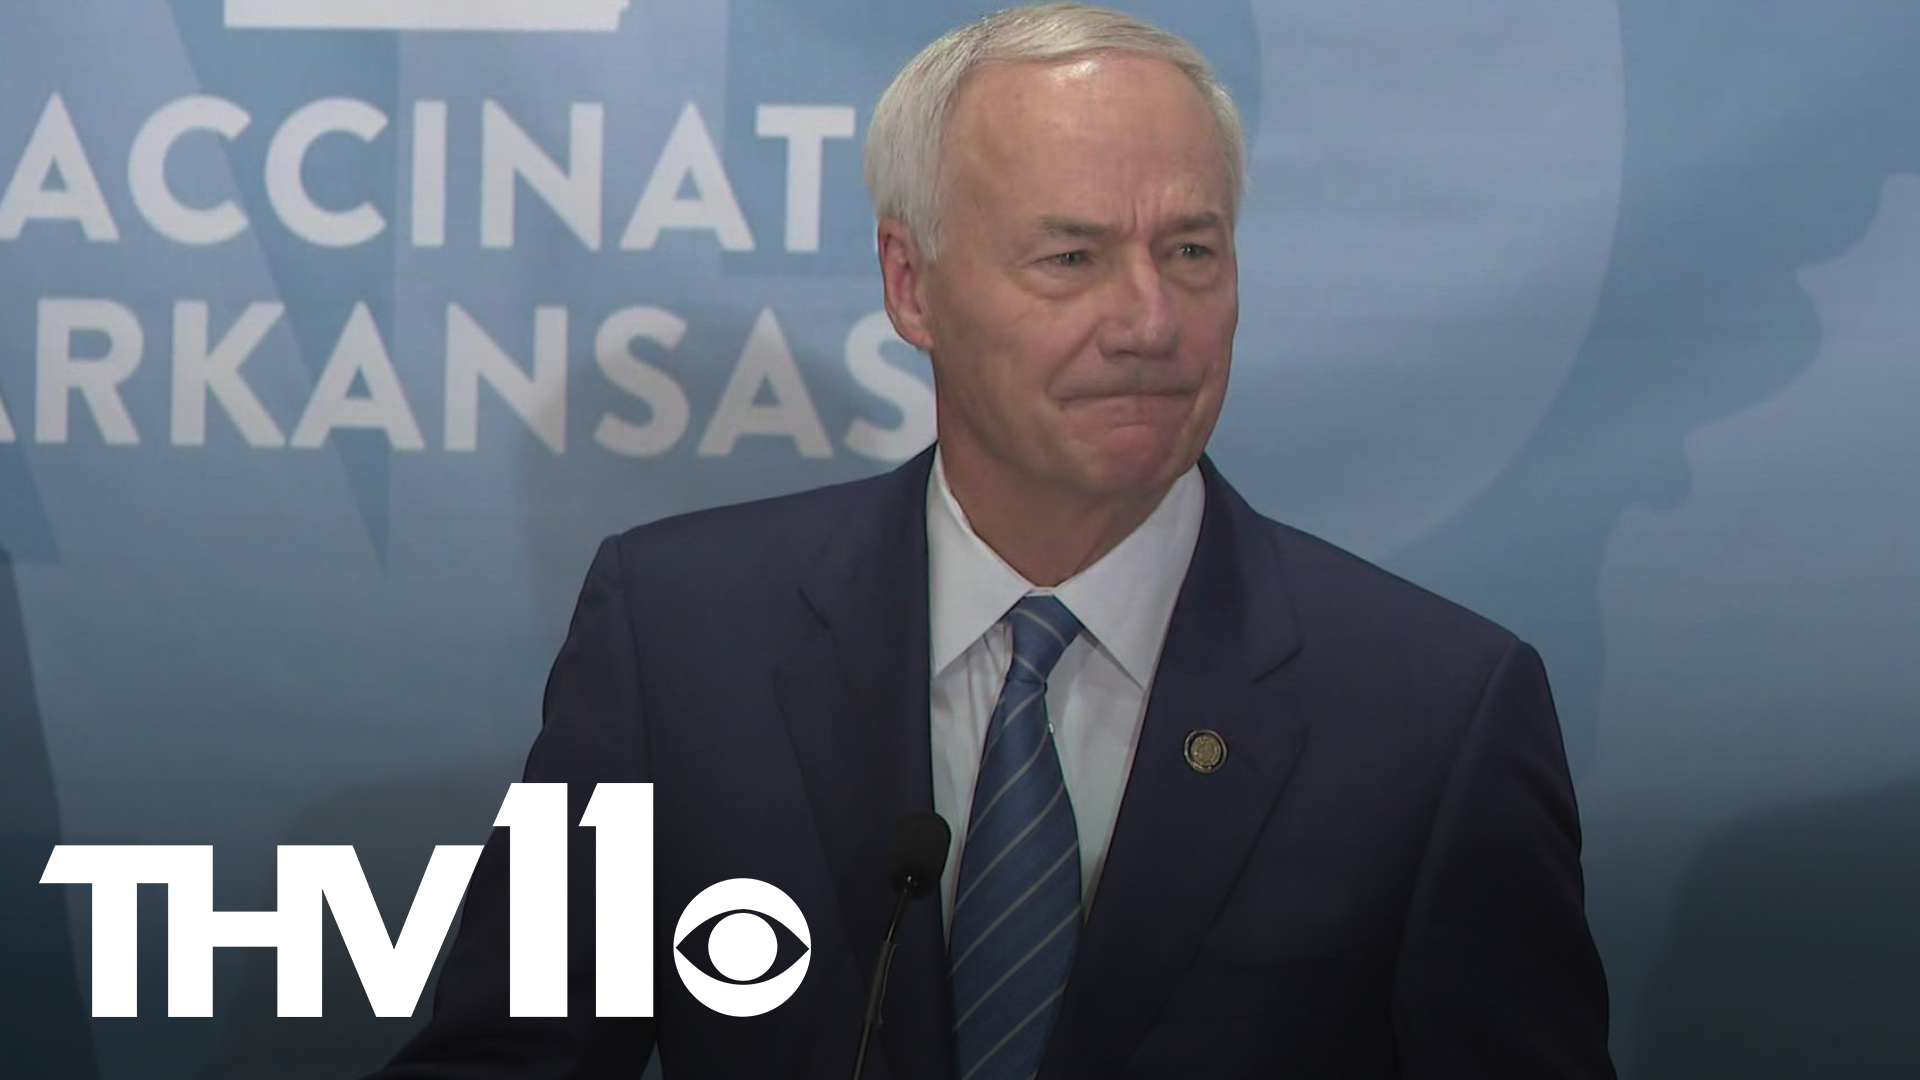 Governor Asa Hutchinson said Tuesday that he regrets signing a mask mandate ban into law. He has called a special session to amend the law for schools.